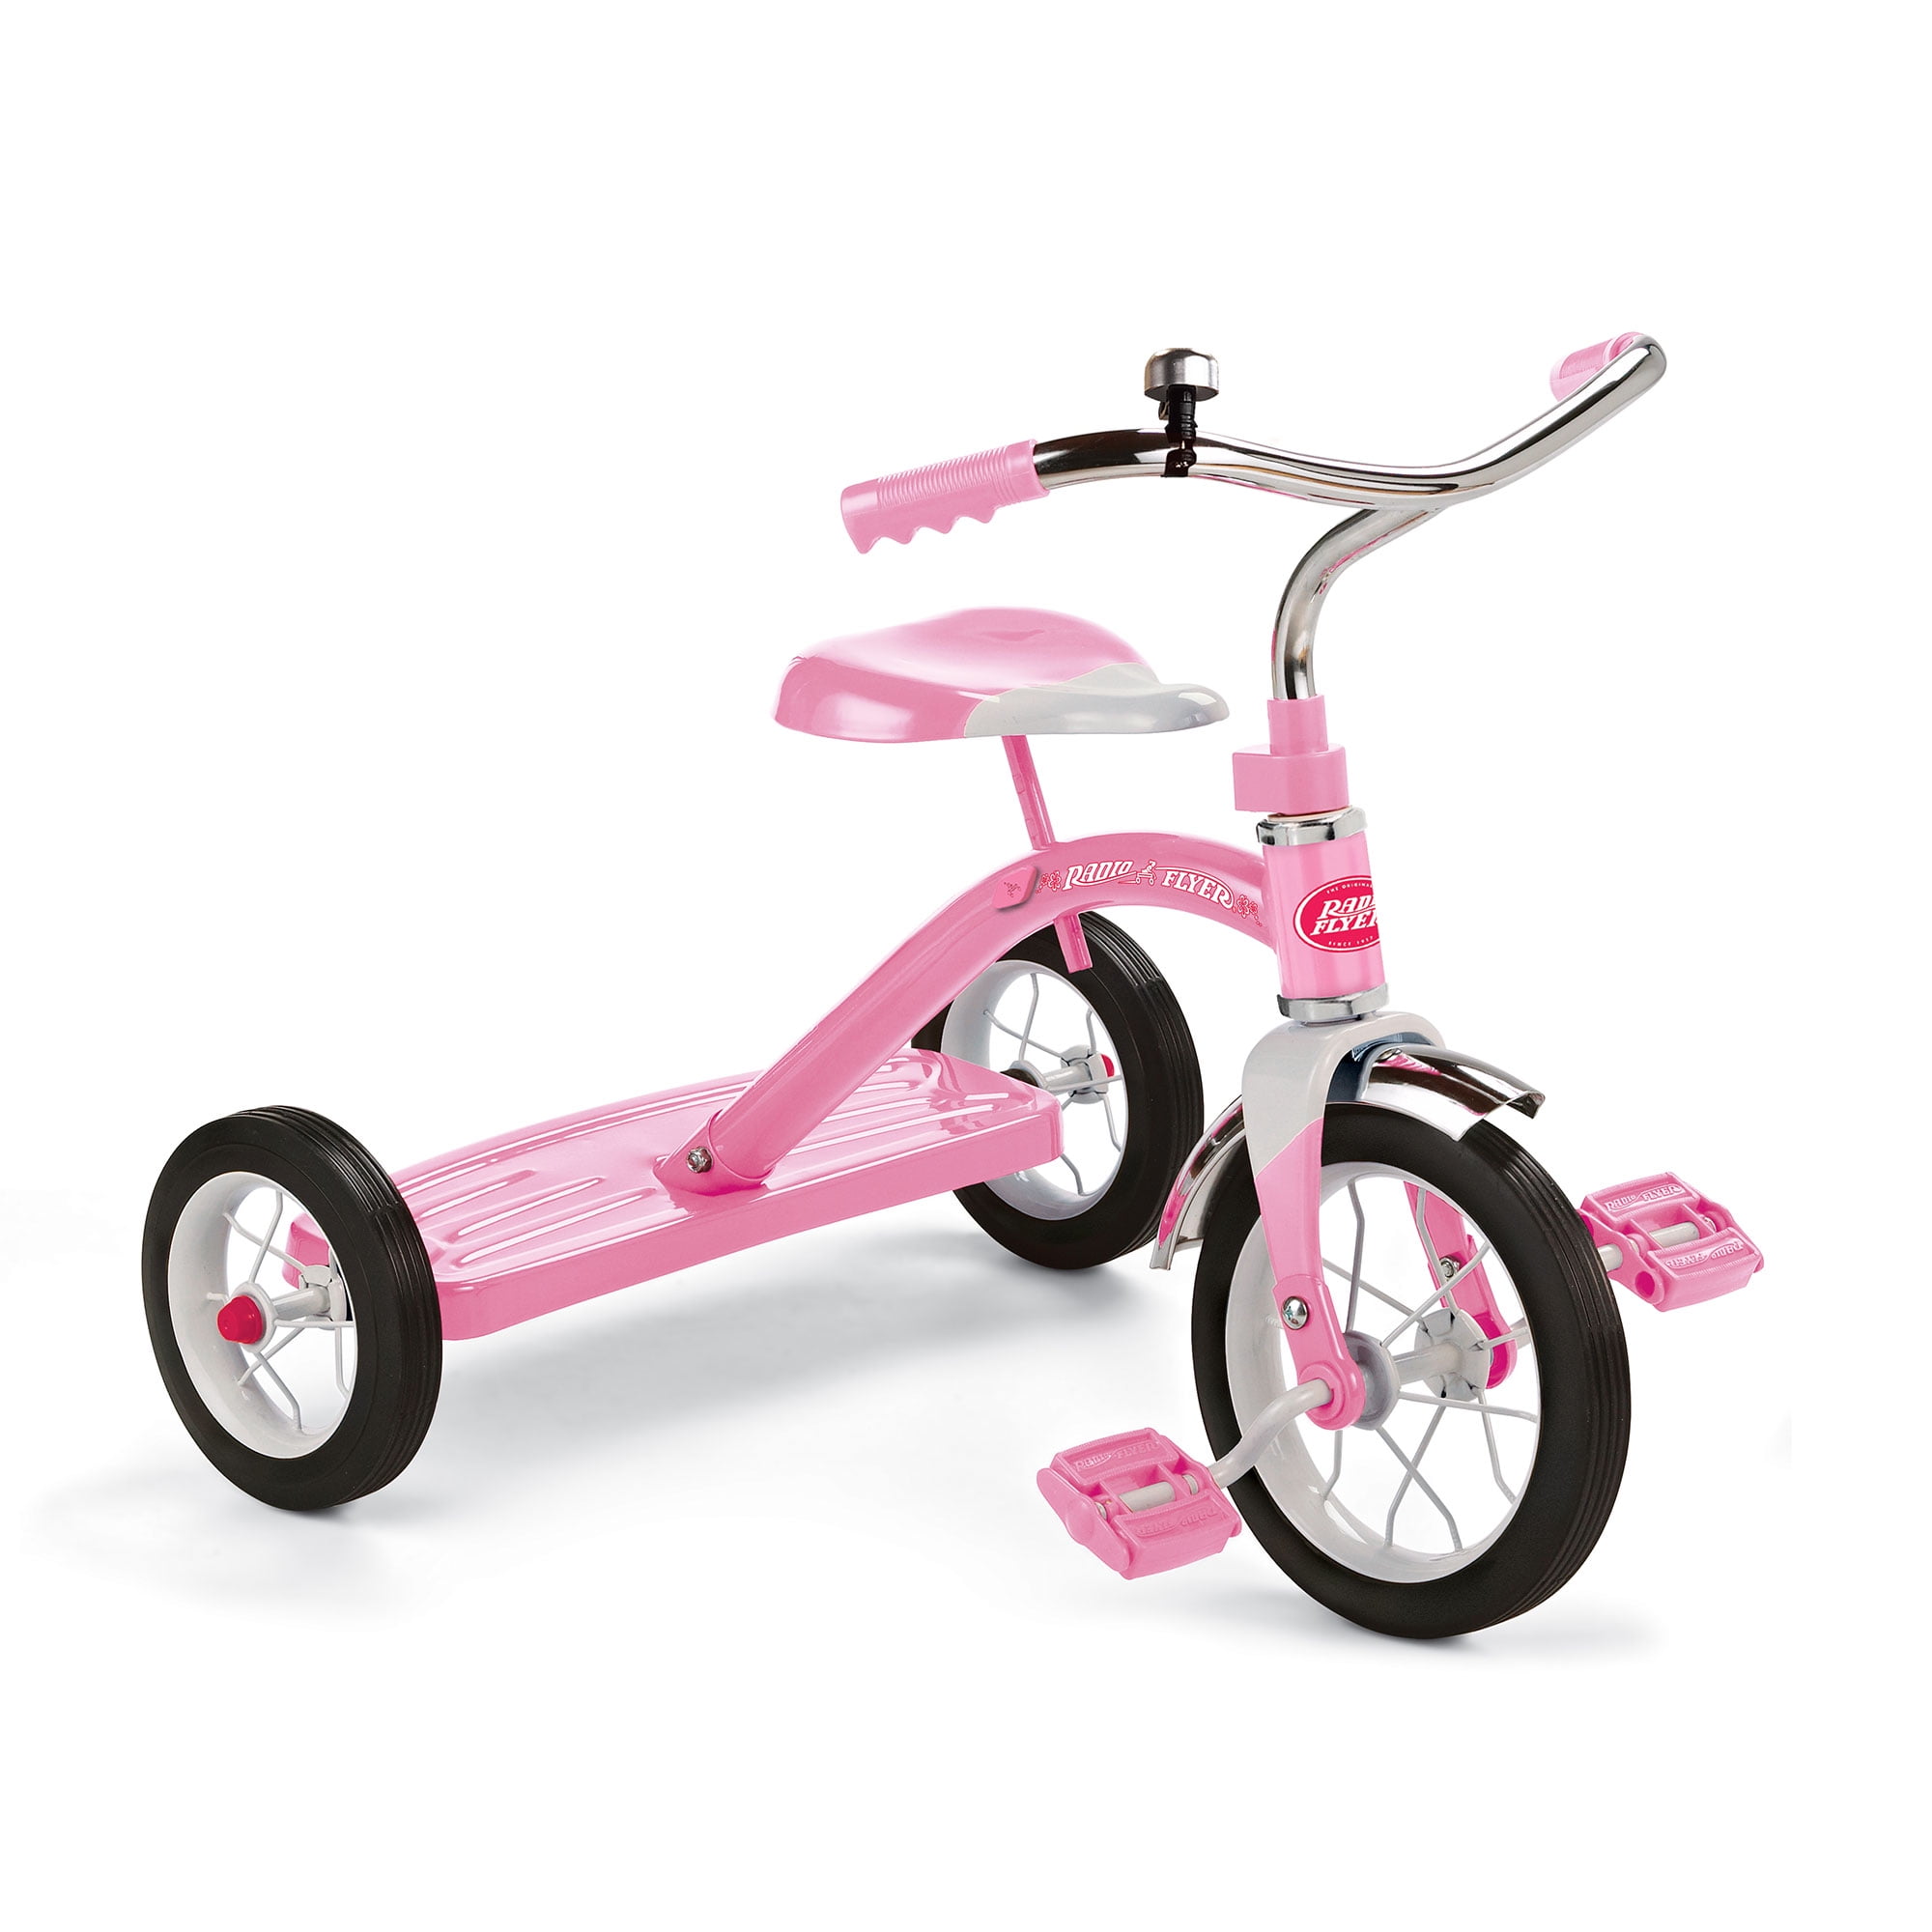 Tricycle Classic Red for sale online Radio Flyer 10 in 